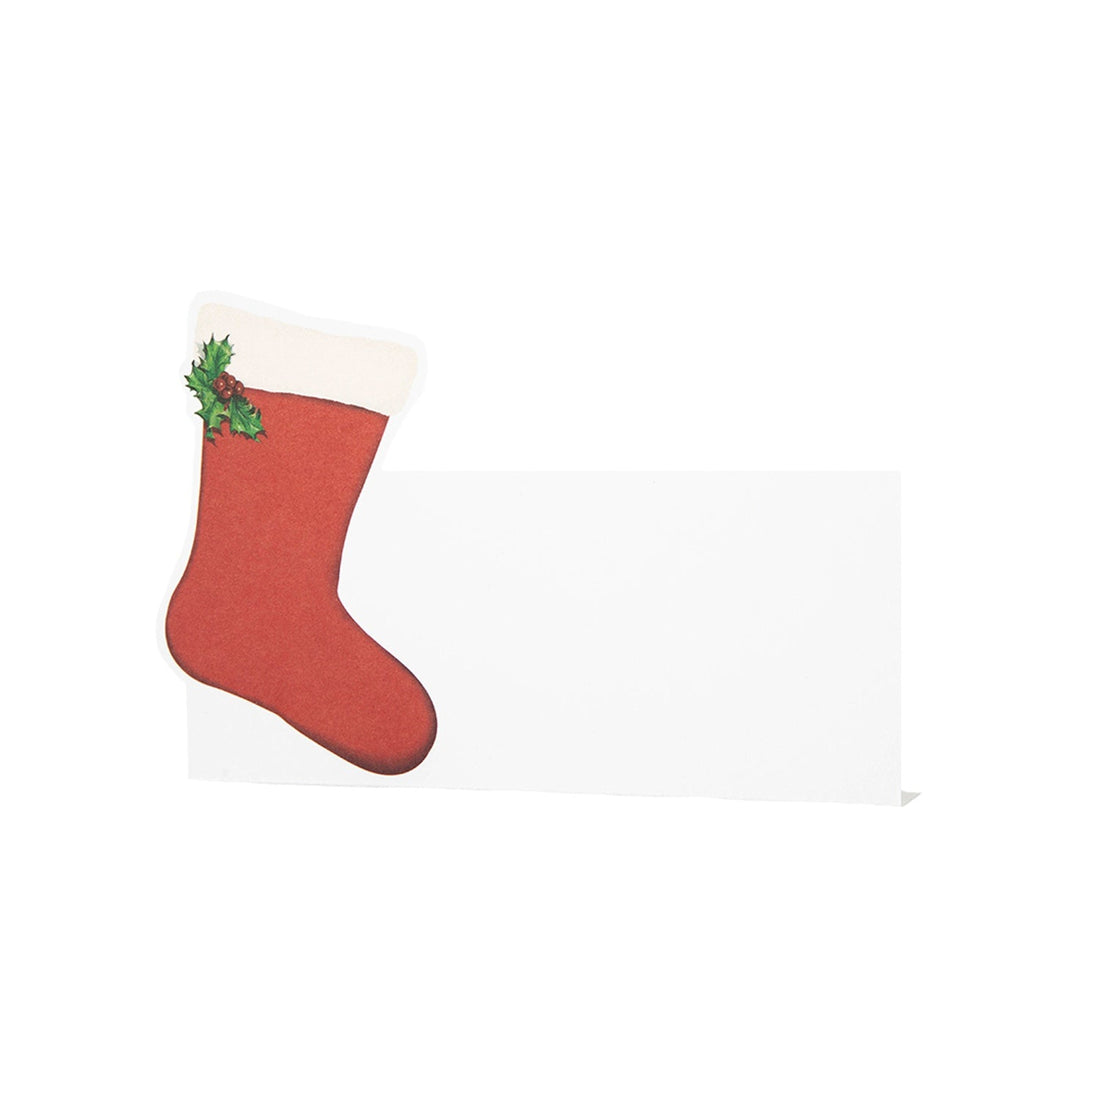 Stocking Place Card